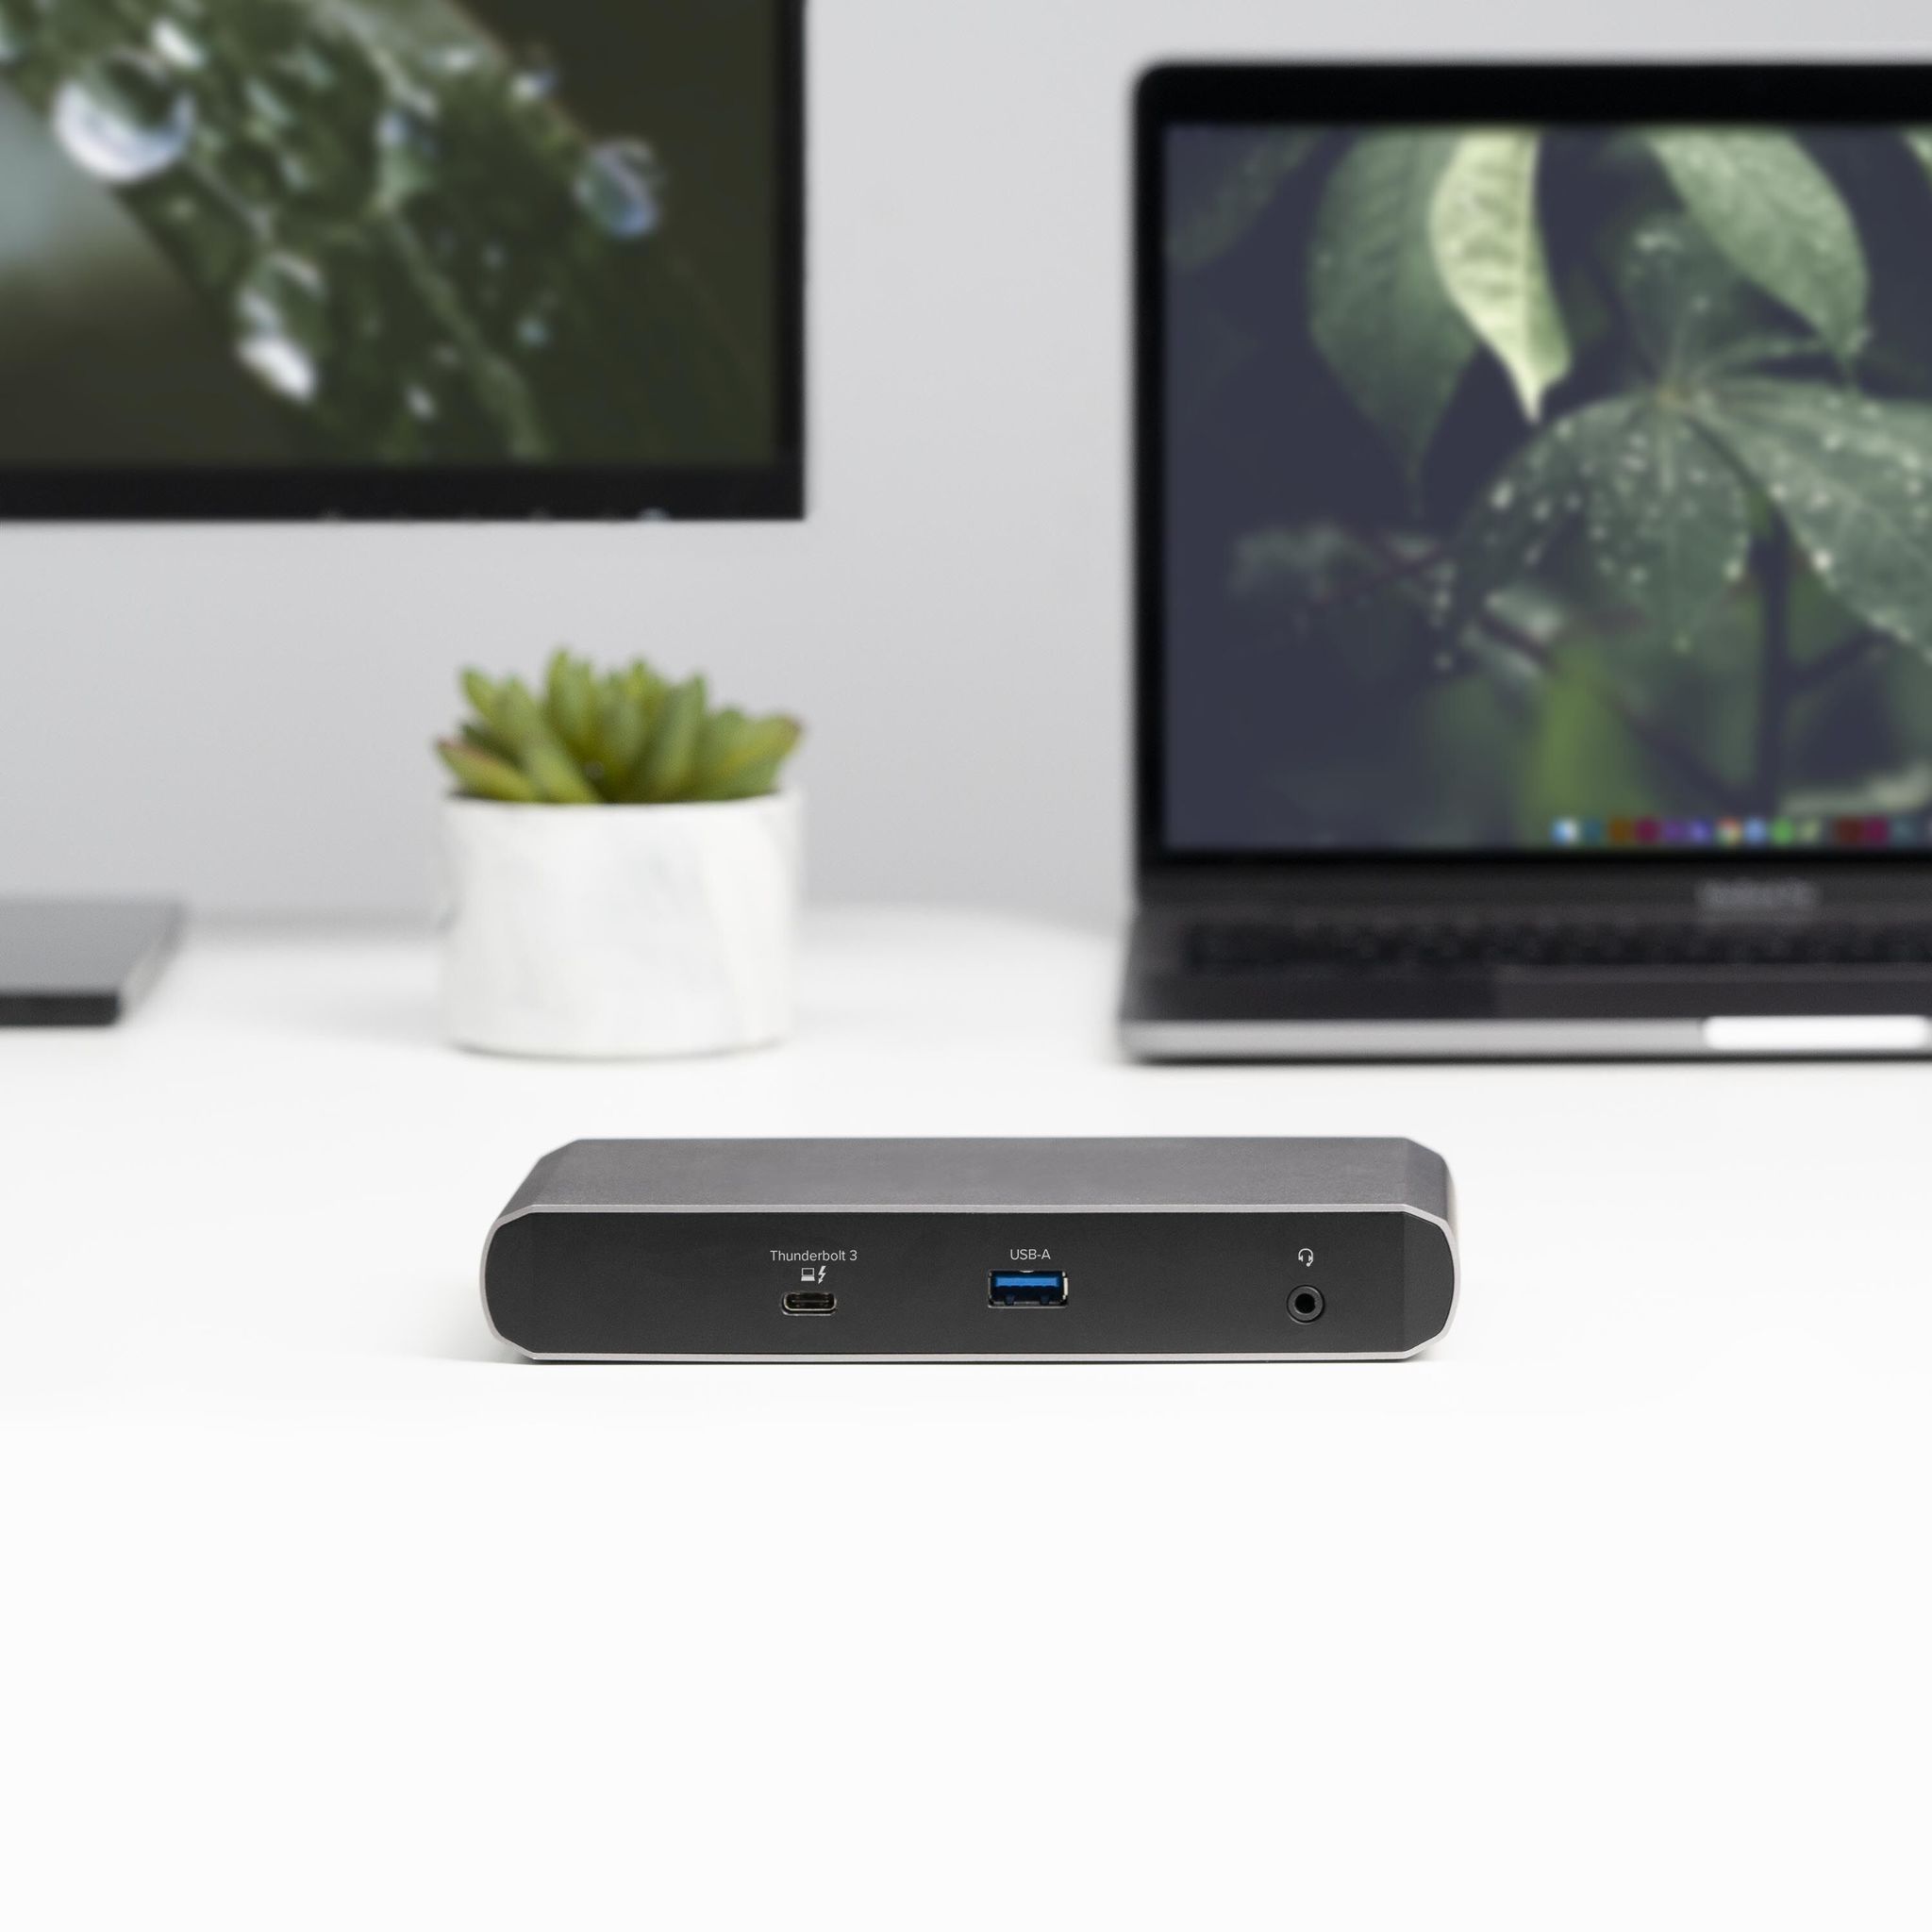 Plugable Tbt3 Udc1 Thunderbolt Dock connected to Macbook with display